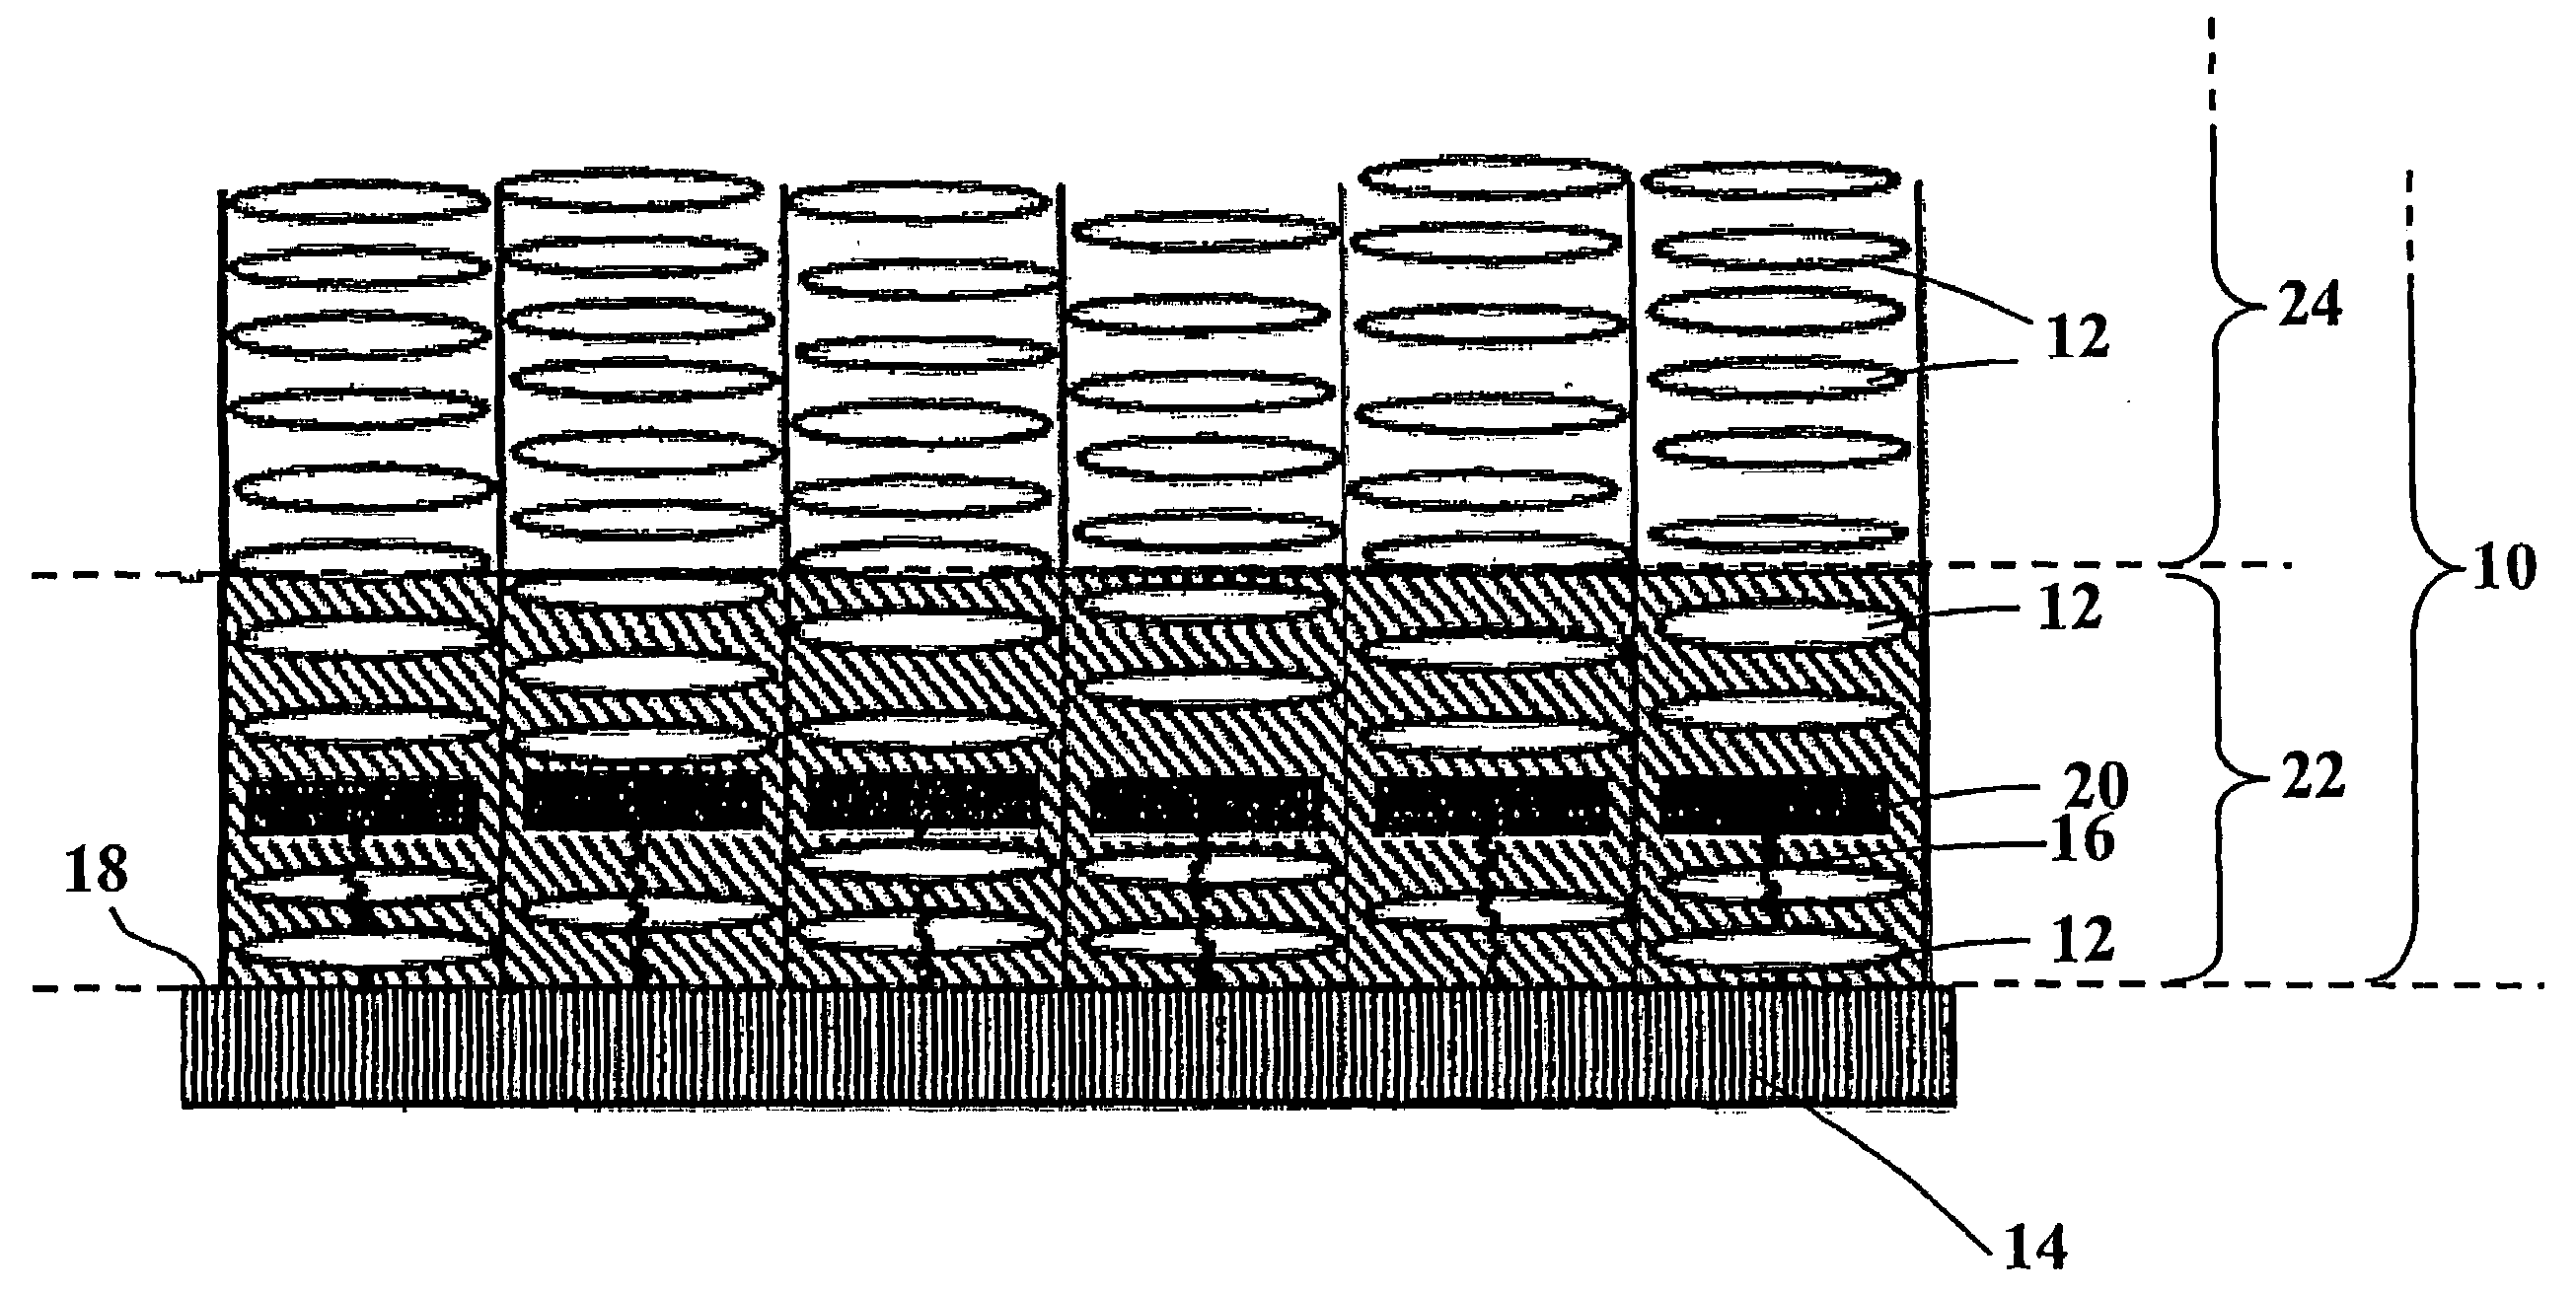 Liquid crystal device, a method for producing a liquid crystal device and a method for controlling a liquid crystal device